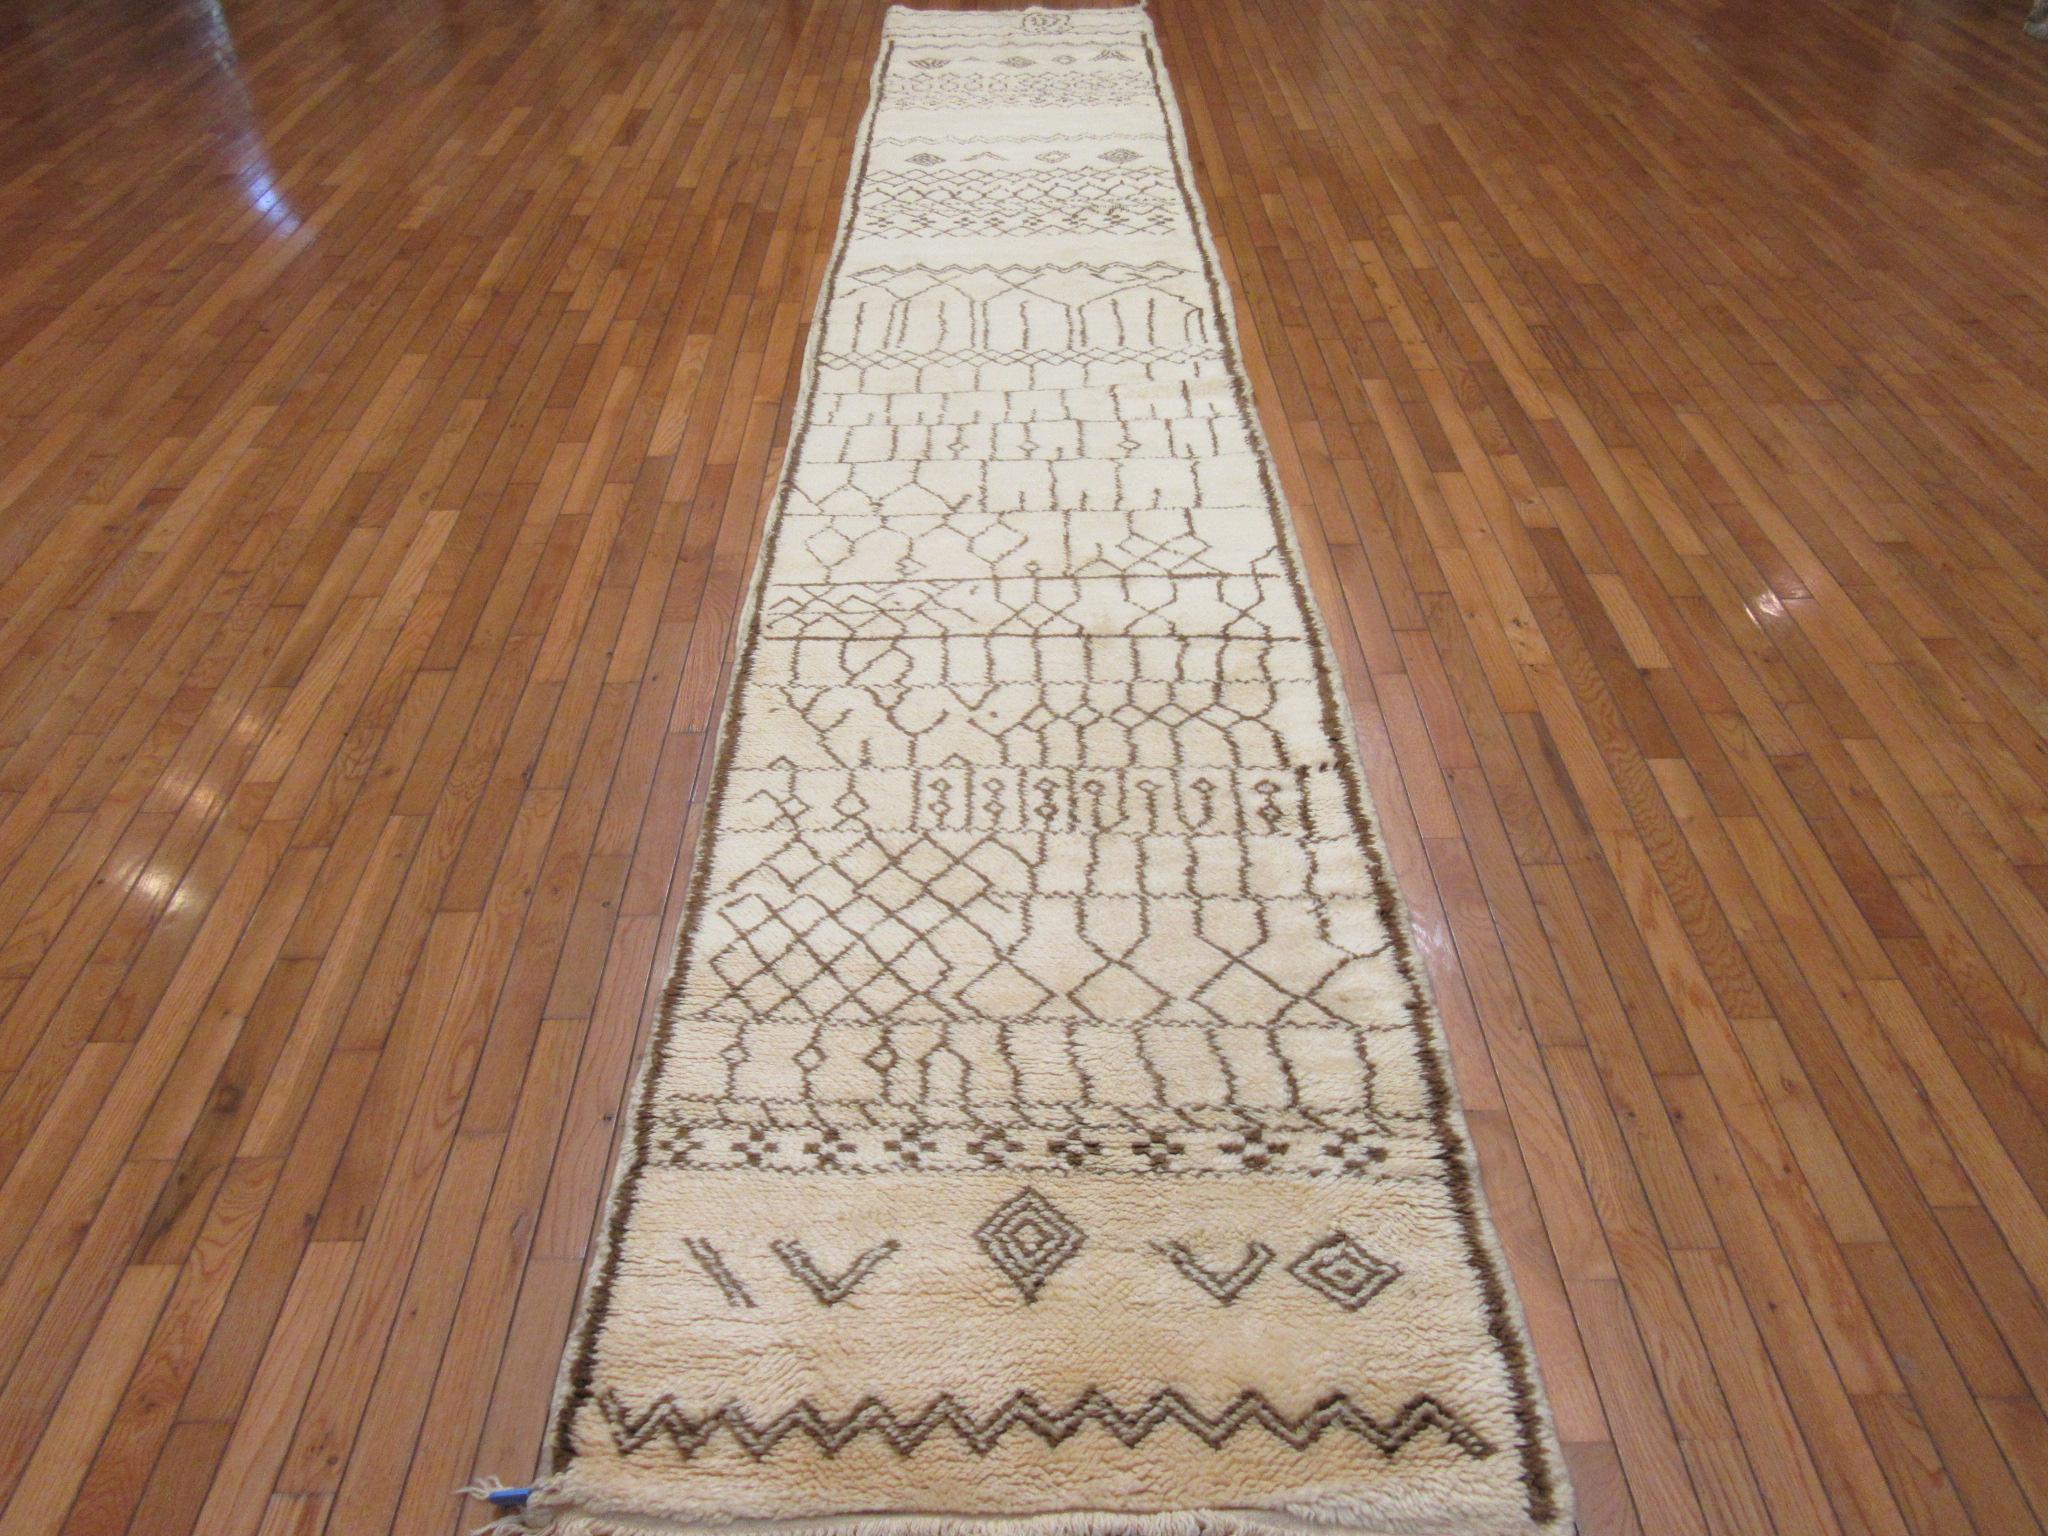 This is a new long hand knotted genuine Moroccan runner rug. It is made with wool in a very simple design.
The rug measures 3' x 17' and in new condition.